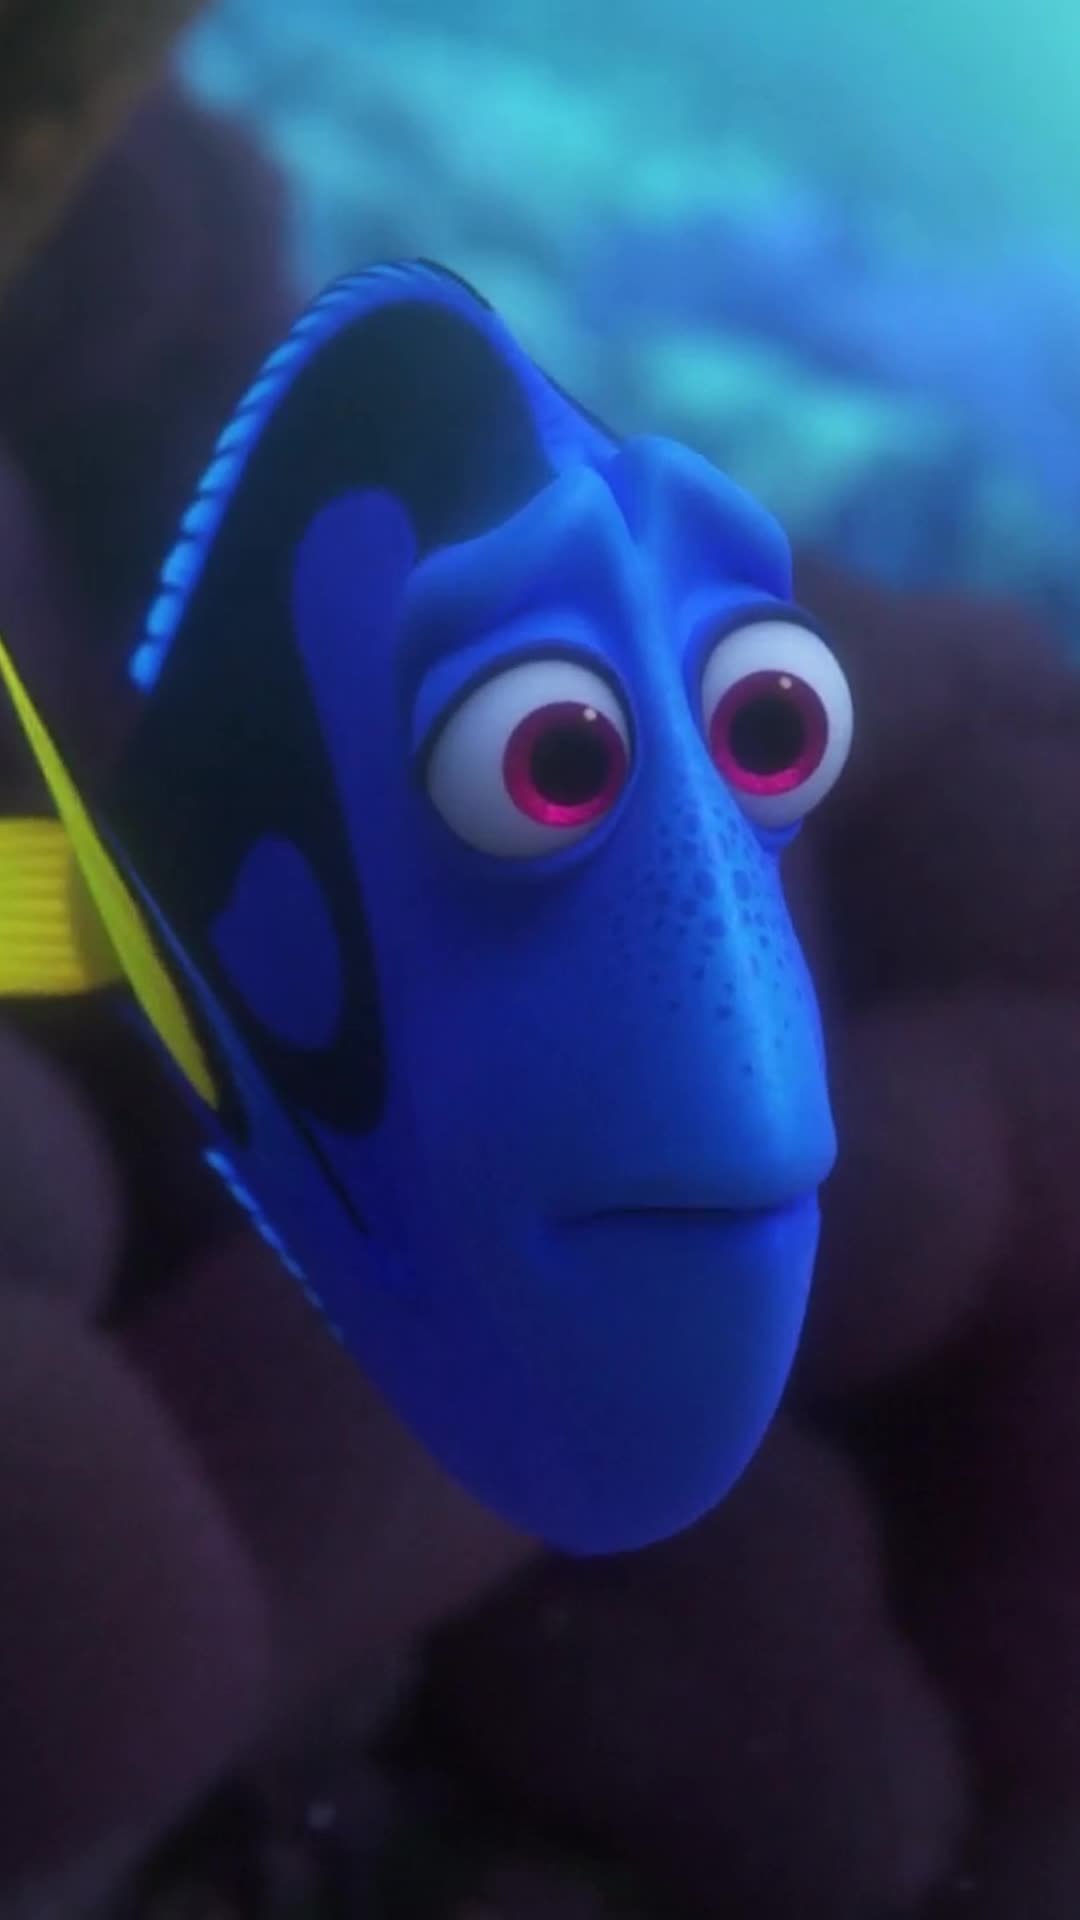 watch finding dory online stream